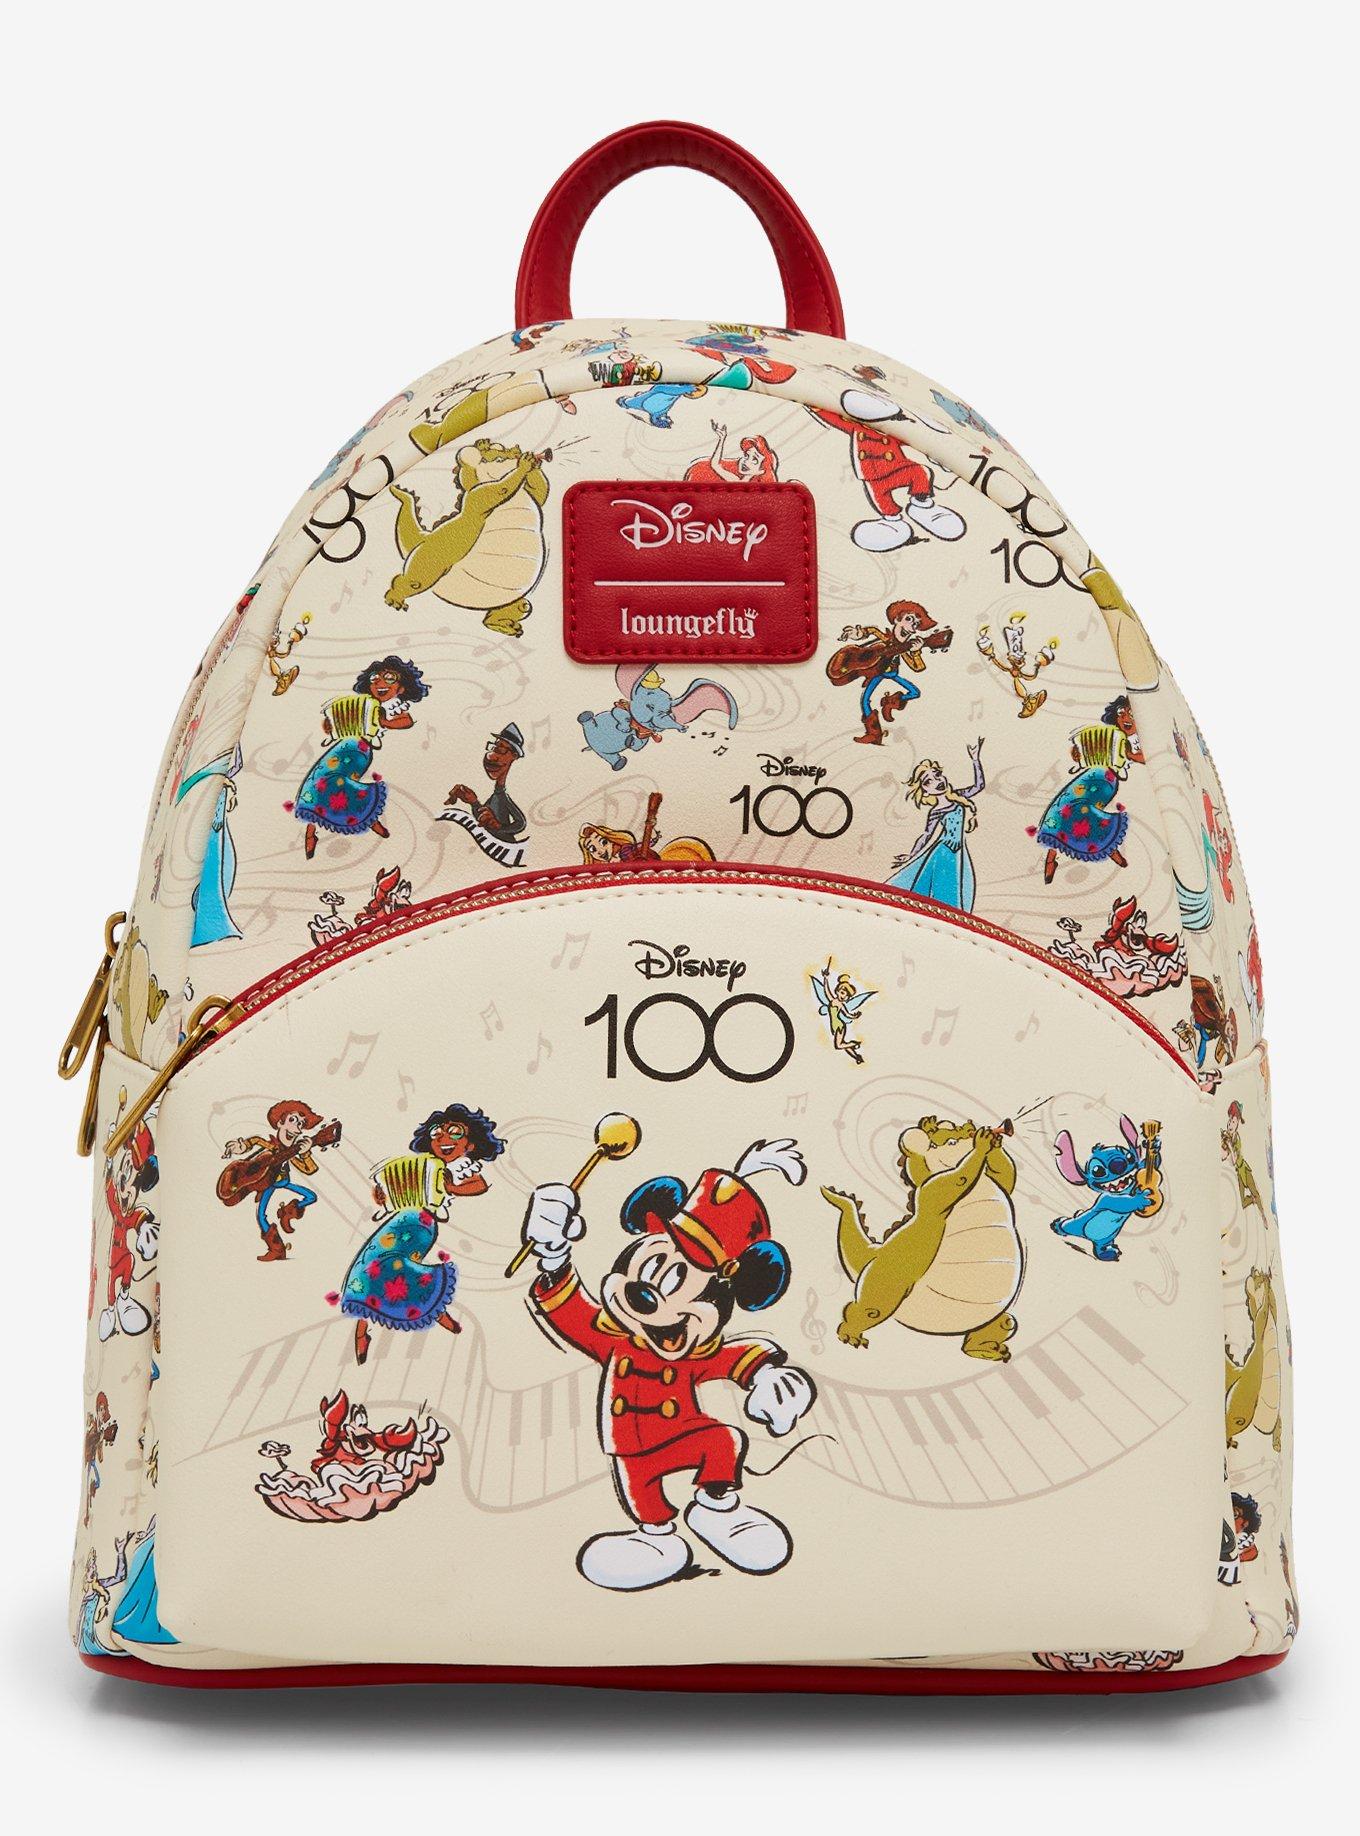 Disney100 Decades Collection (1920s) to Include Steamboat Willie Loungefly  Mini Backpack – Mousesteps